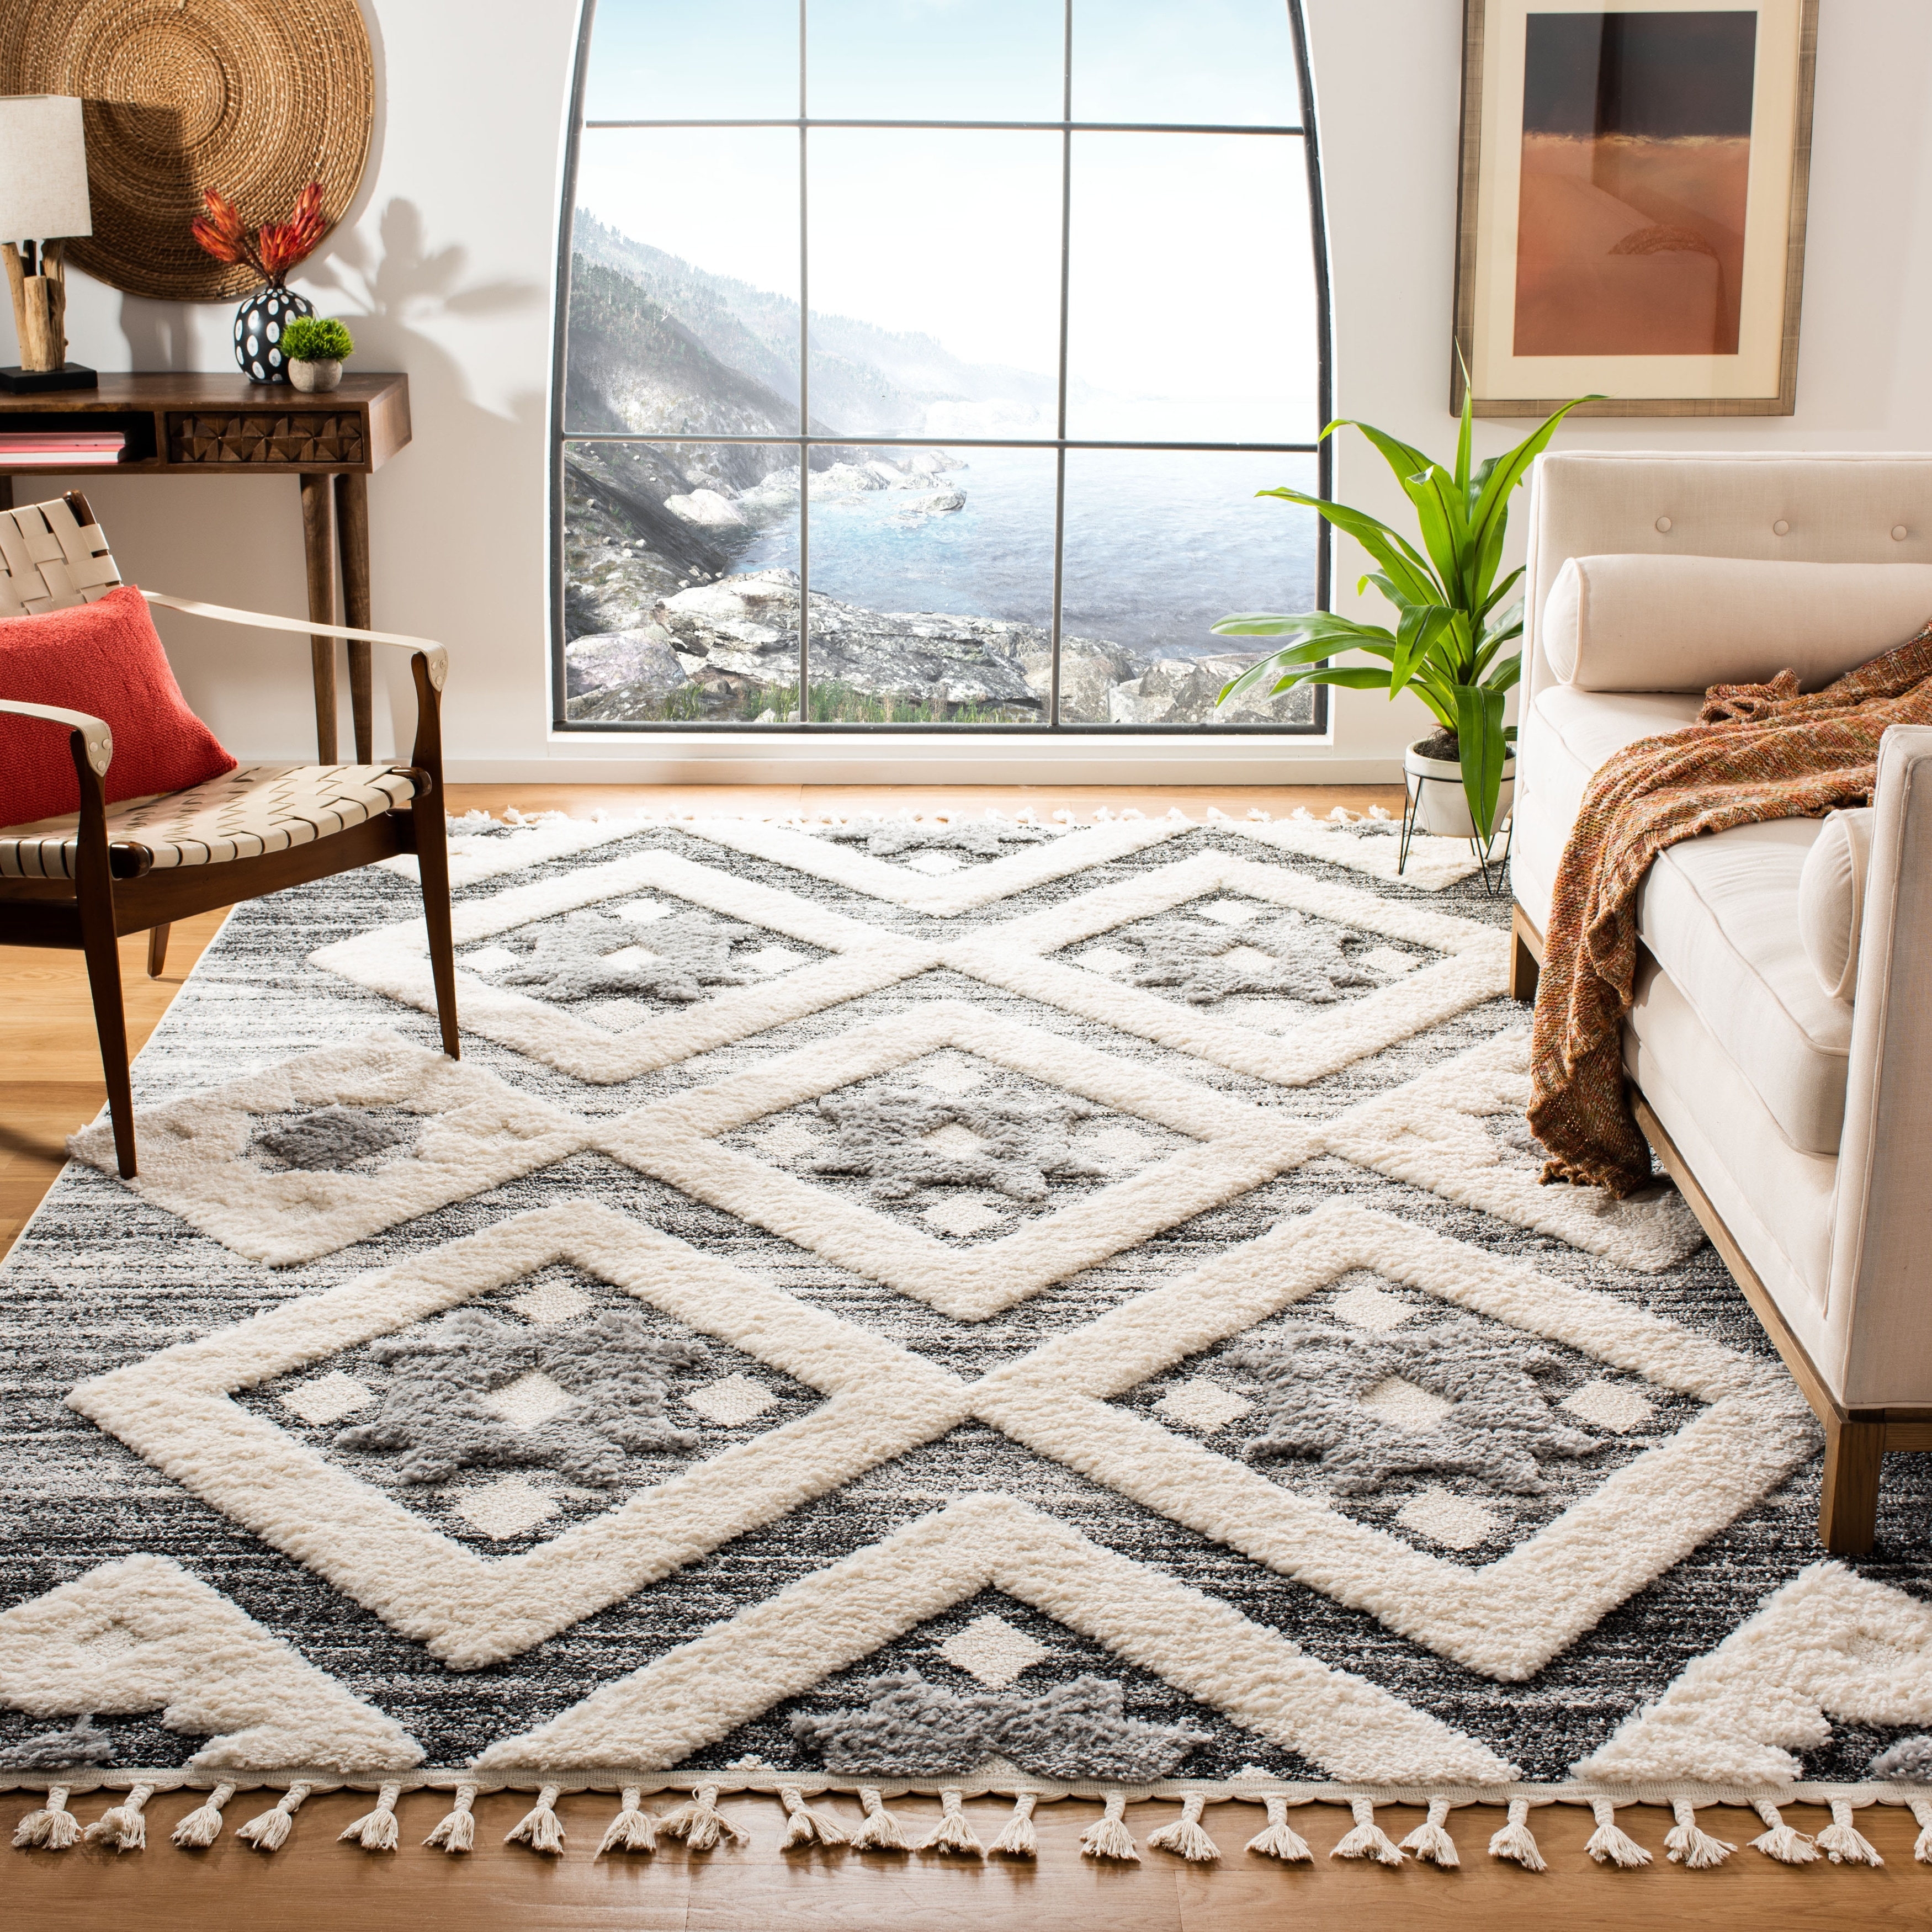 Blue Cream SAFAVIEH Pro Luxe Shag Collection PLX435L Moroccan Boho Tassel Non-Shedding Living Room Bedroom Dining Room Entryway Plush 2.4-inch Thick Area Rug 6'7 x 6'7 Square